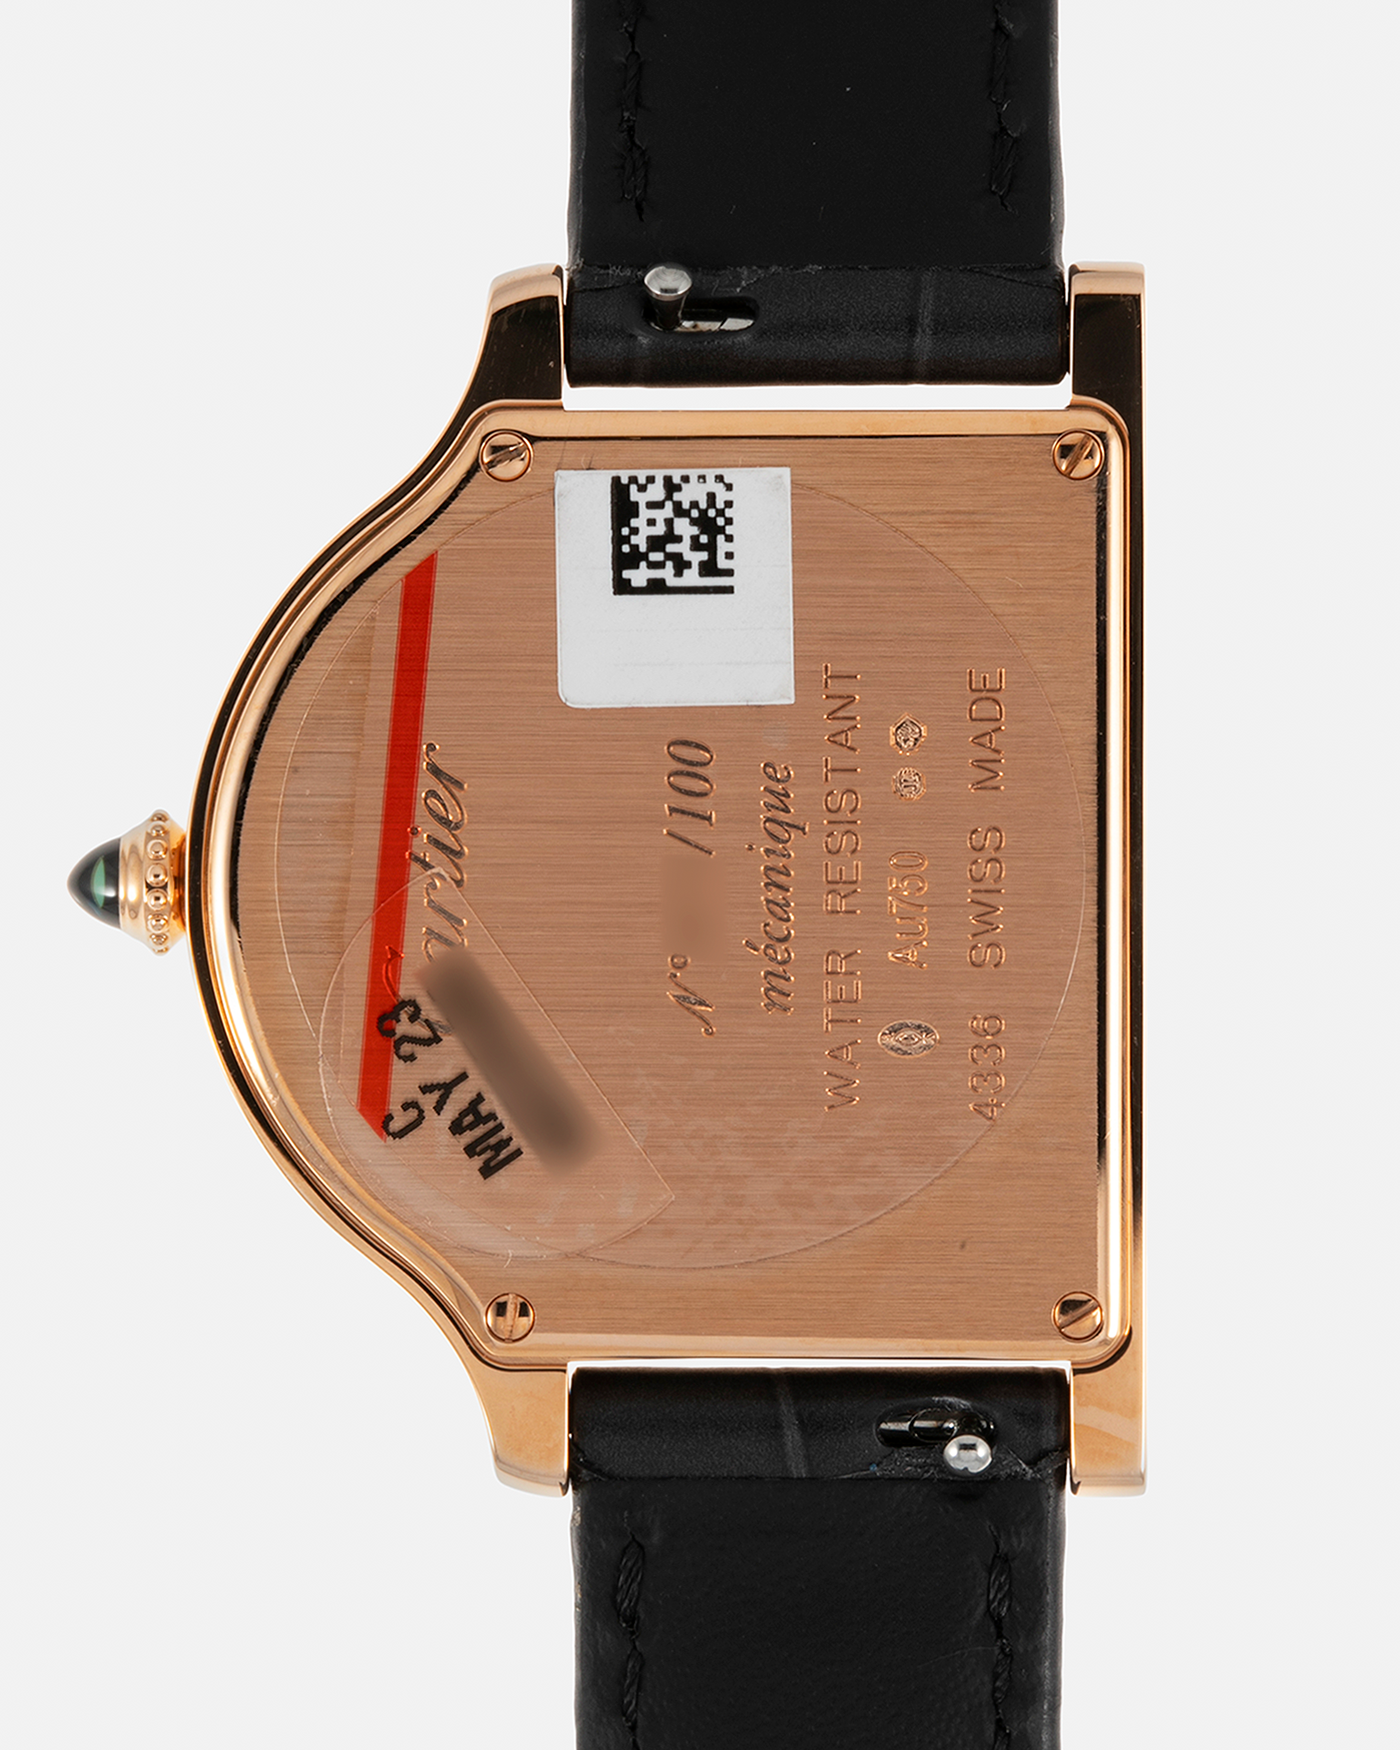 Brand: Cartier Year: 2021 Model: Cartier Privé Collection Cloche De Cartier, Limited to 100 Pieces Reference: CRWGCC0003 Material: 18-carat Rose Gold Movement: Cartier Cal. 1917MC, Manual-Winding Case Dimensions: 37.15mm x 28.75mm and 6.7mm Lug Width: 16mm Strap: Cartier Grey Alligator Leather Strap with Signed 18-carat Rose Gold Tang Buckle